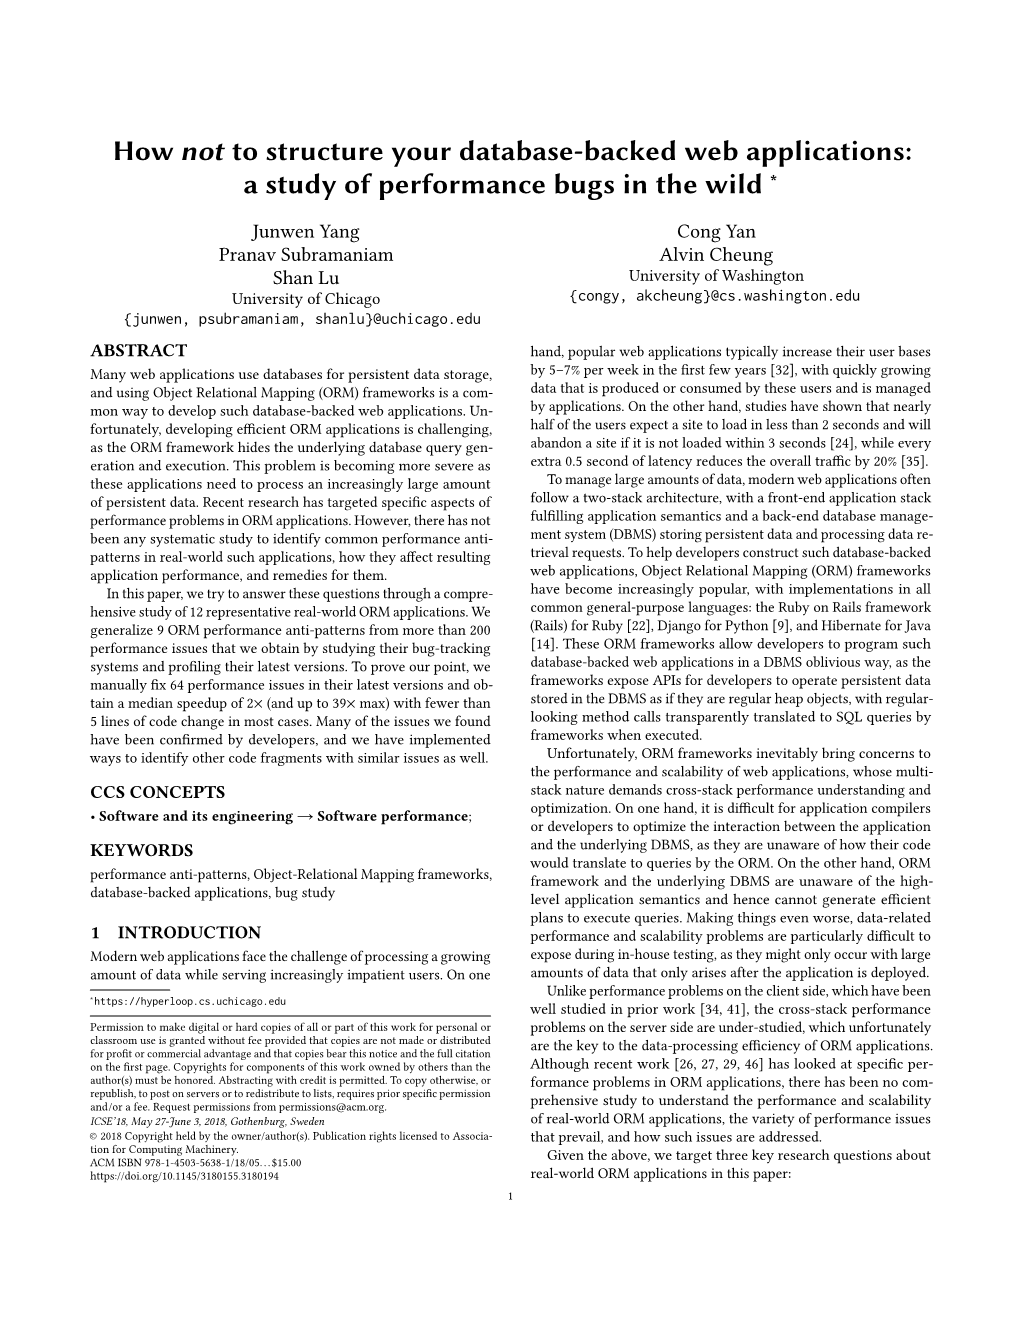 How Not to Structure Your Database-Backed Web Applications: a Study of Performance Bugs in the Wild ∗